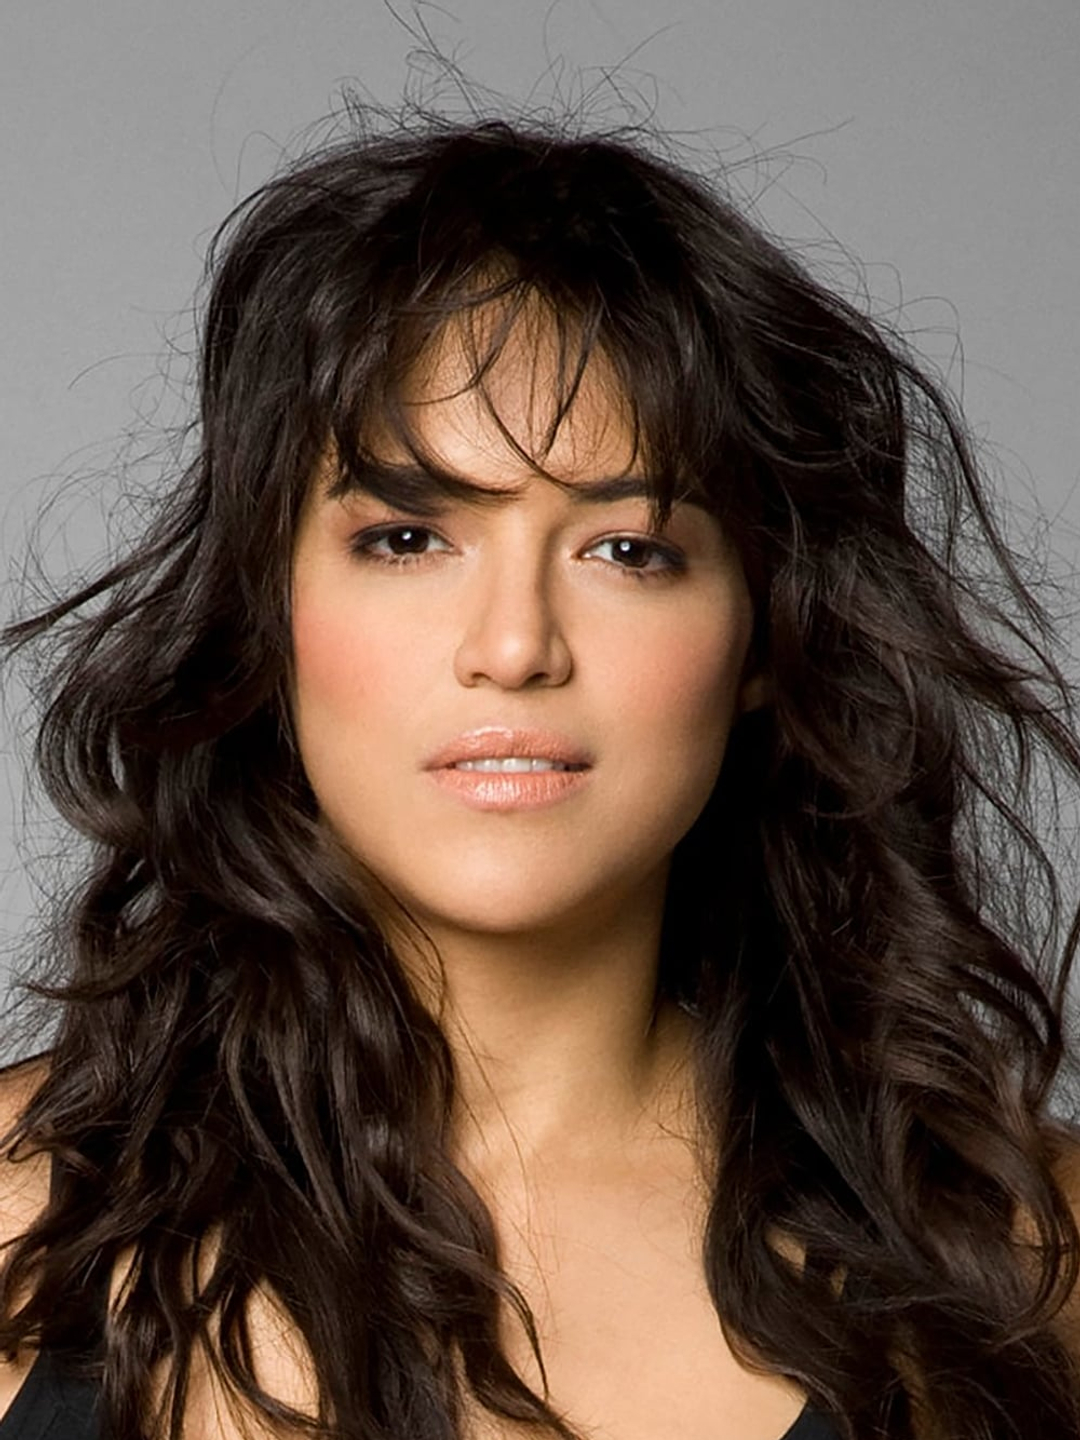 Michelle Rodriguez story of success